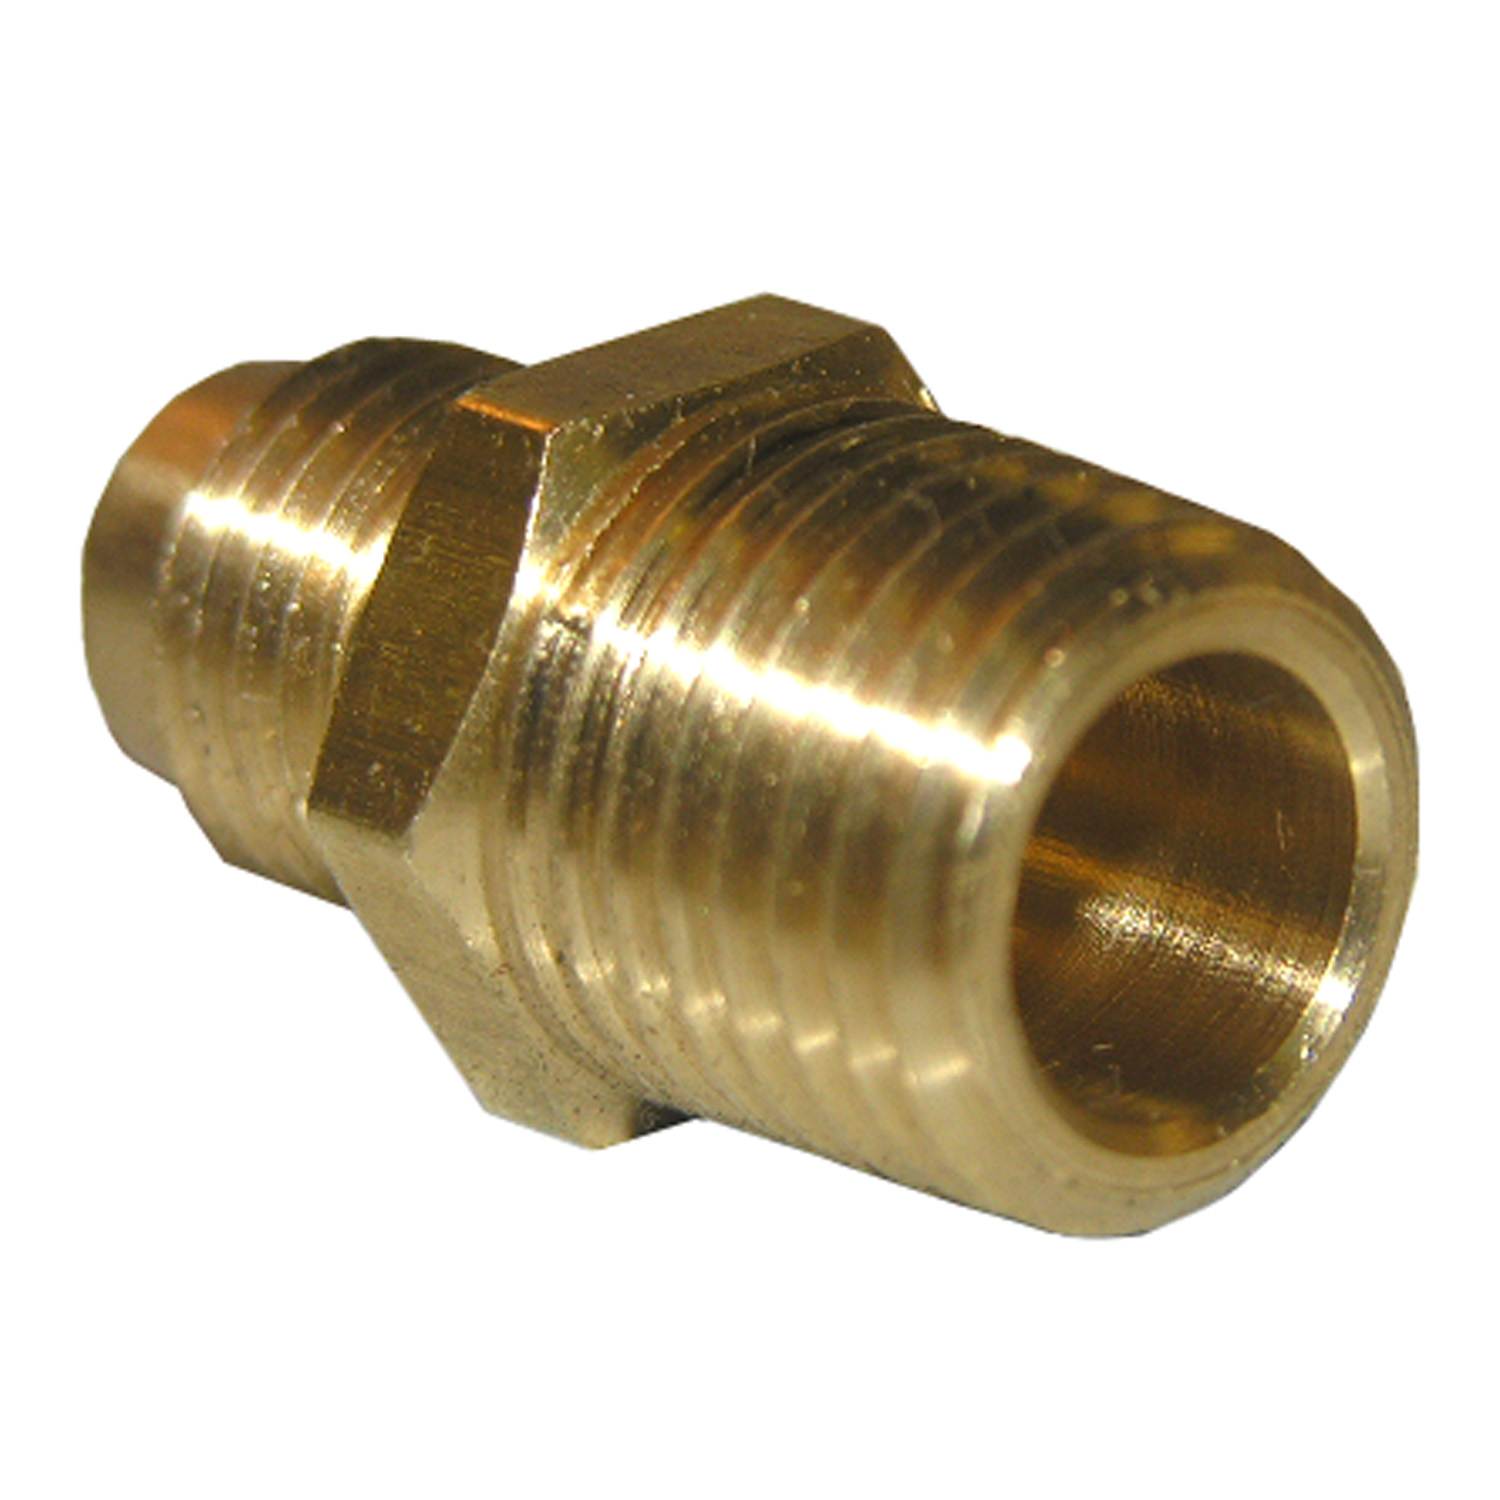 17-4809 Pipe Adapter, 1/4 x 1/8 in, Male Flare x MPT, Brass, 1400 psi Pressure